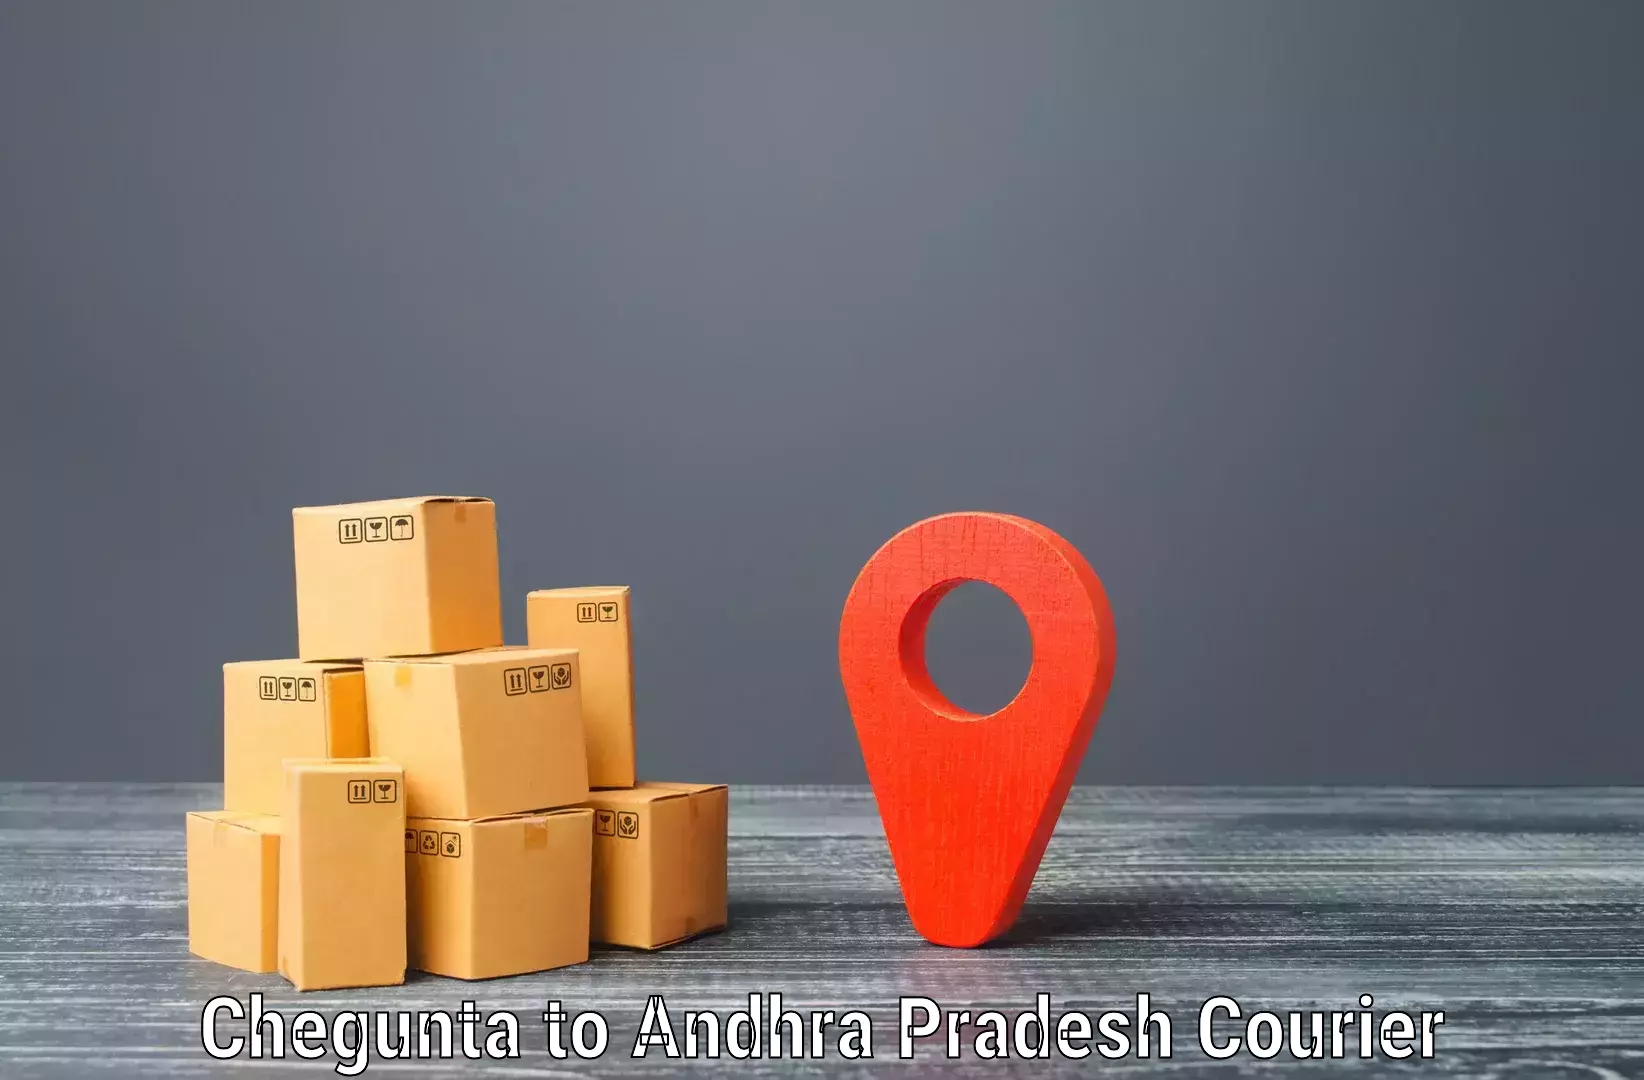 Courier service efficiency in Chegunta to Addateegala